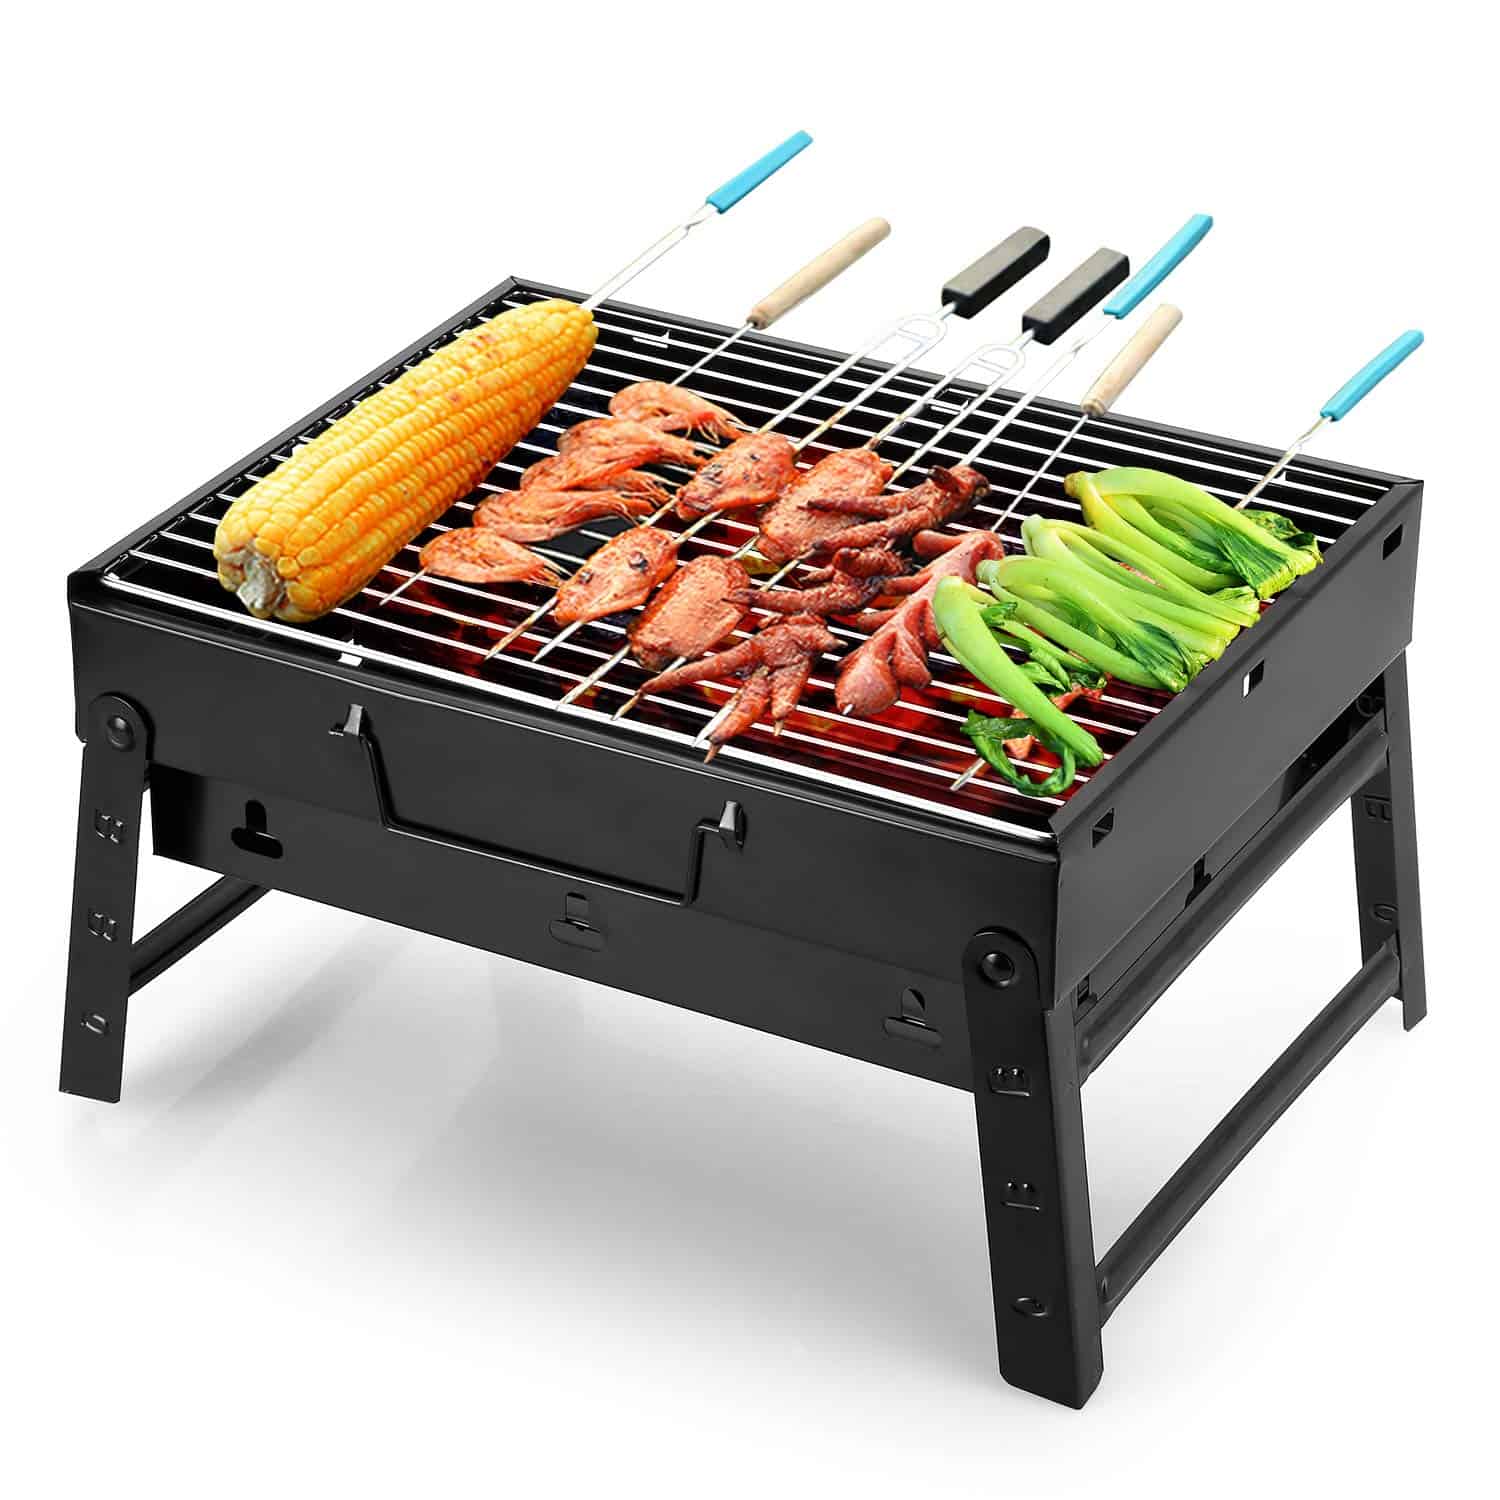 8 best yakitori grills: from electric indoor to charcoal for home